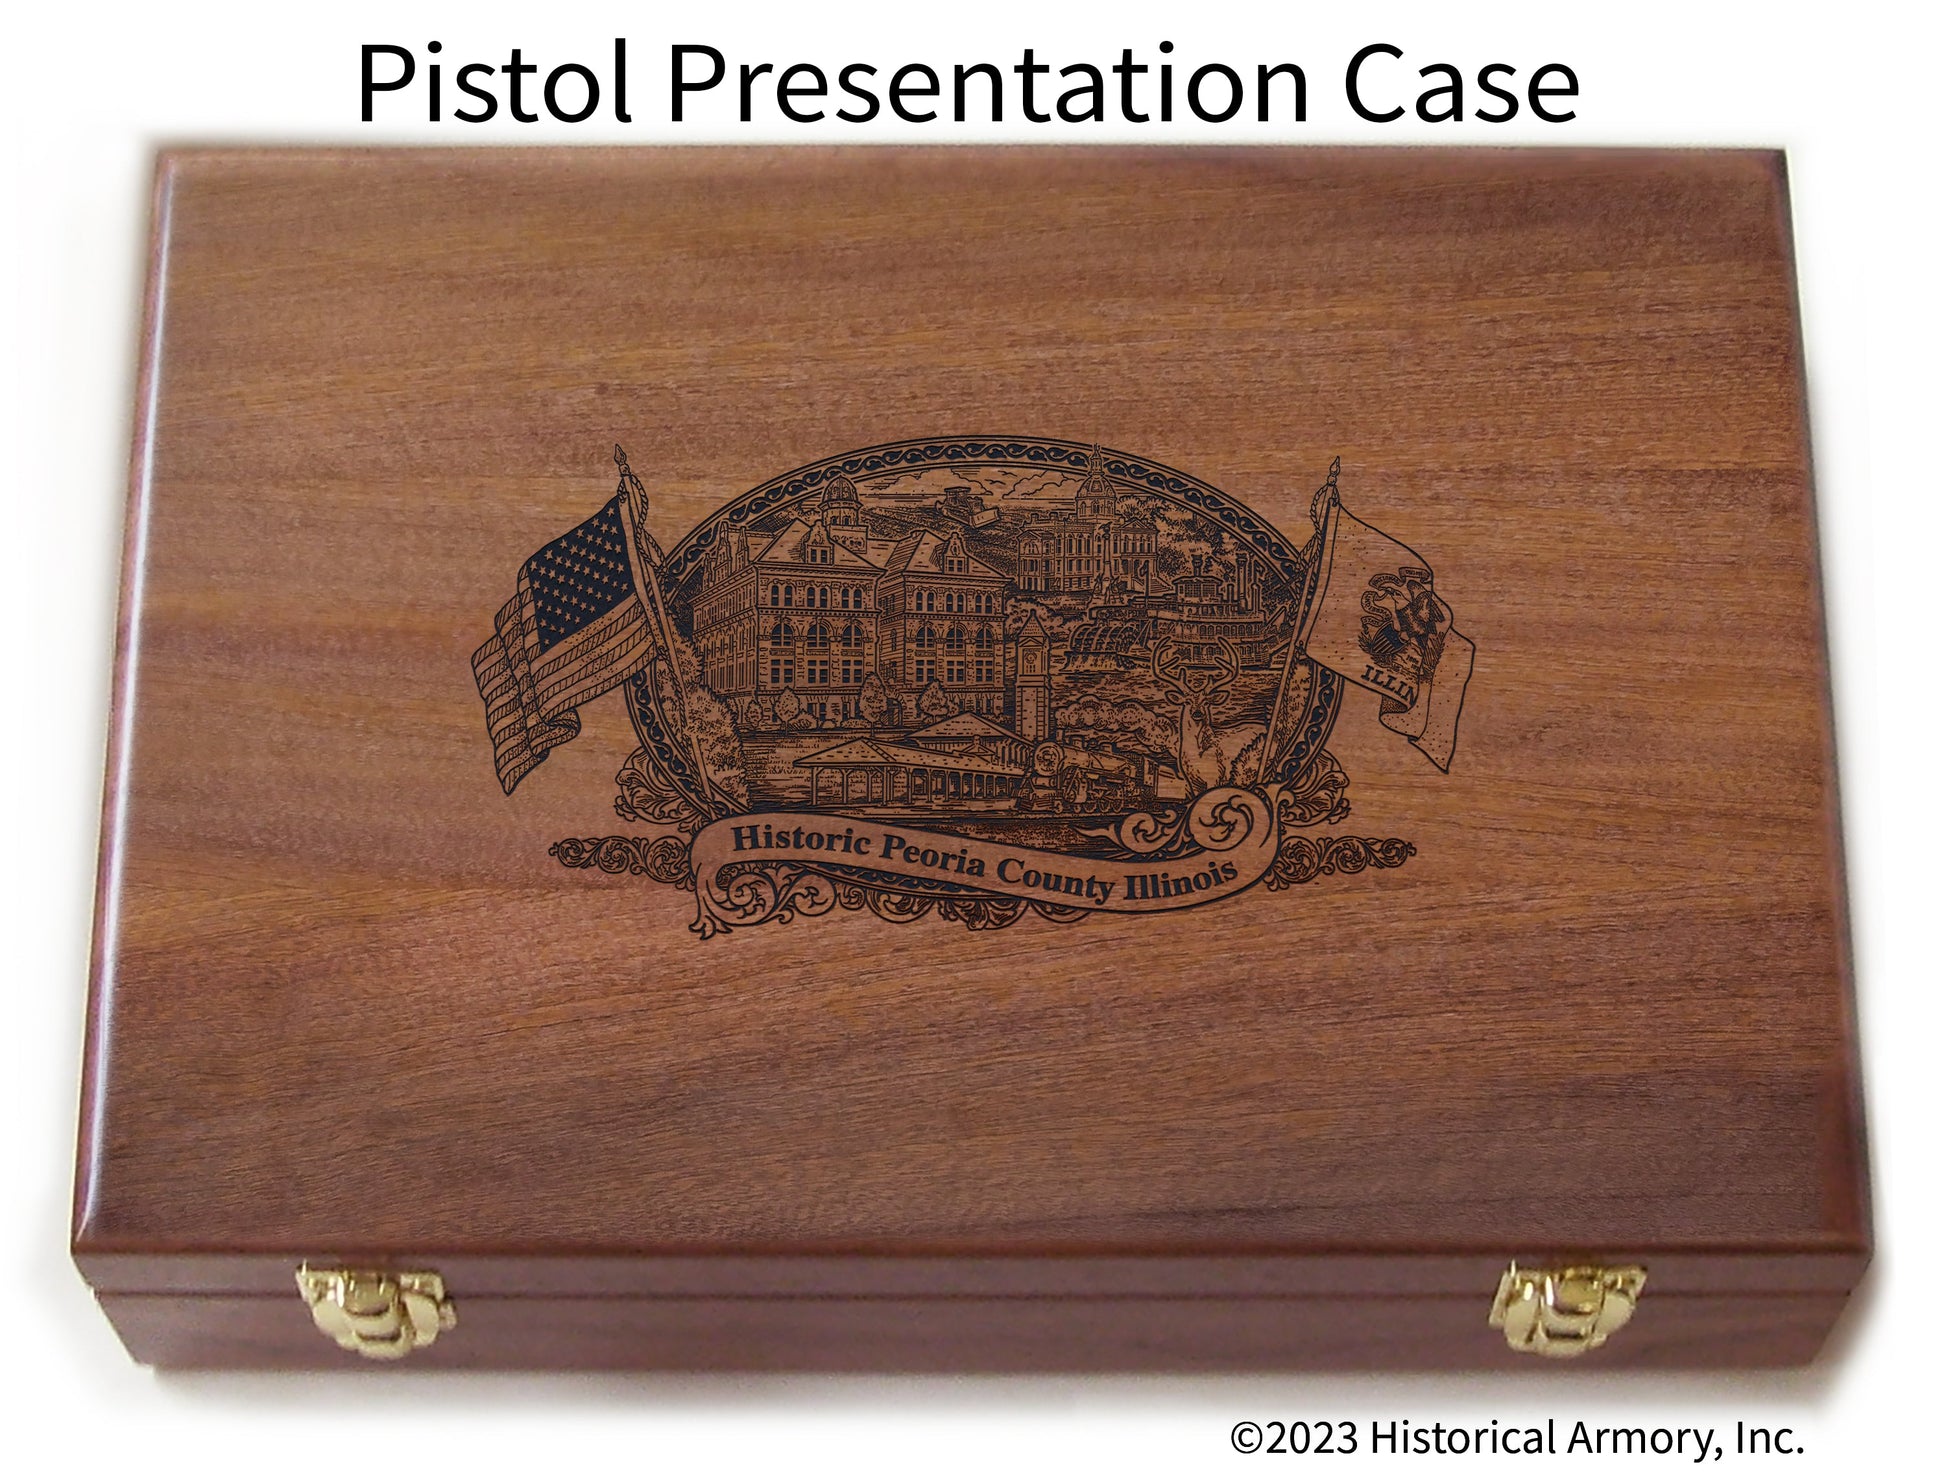 Peoria County Illinois Engraved .45 Auto Ruger 1911 Presentation Case